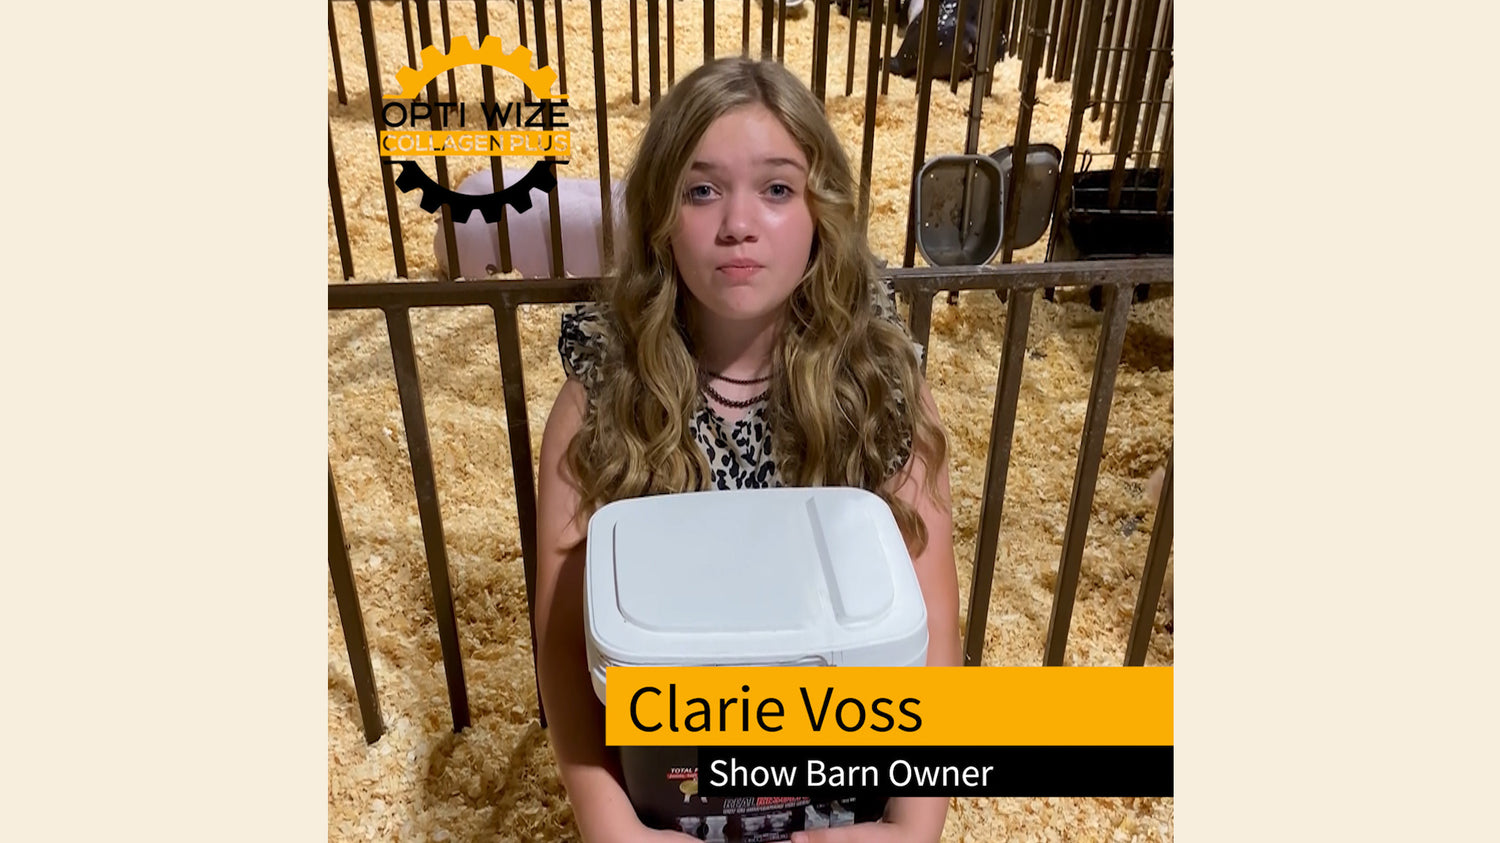 <p>Claire Voss is a champion showpigs breeder. Her OG sired blue barrow (Raised by. Wilber Genetics) strikes again! Champion Light Cross</p><p></p><p>Claire shares how OptiWize helped her gilt with swollen hocks. Now OptiWize is will always be in her feed room as her joint tendon and ligament supplement for pigs.</p>